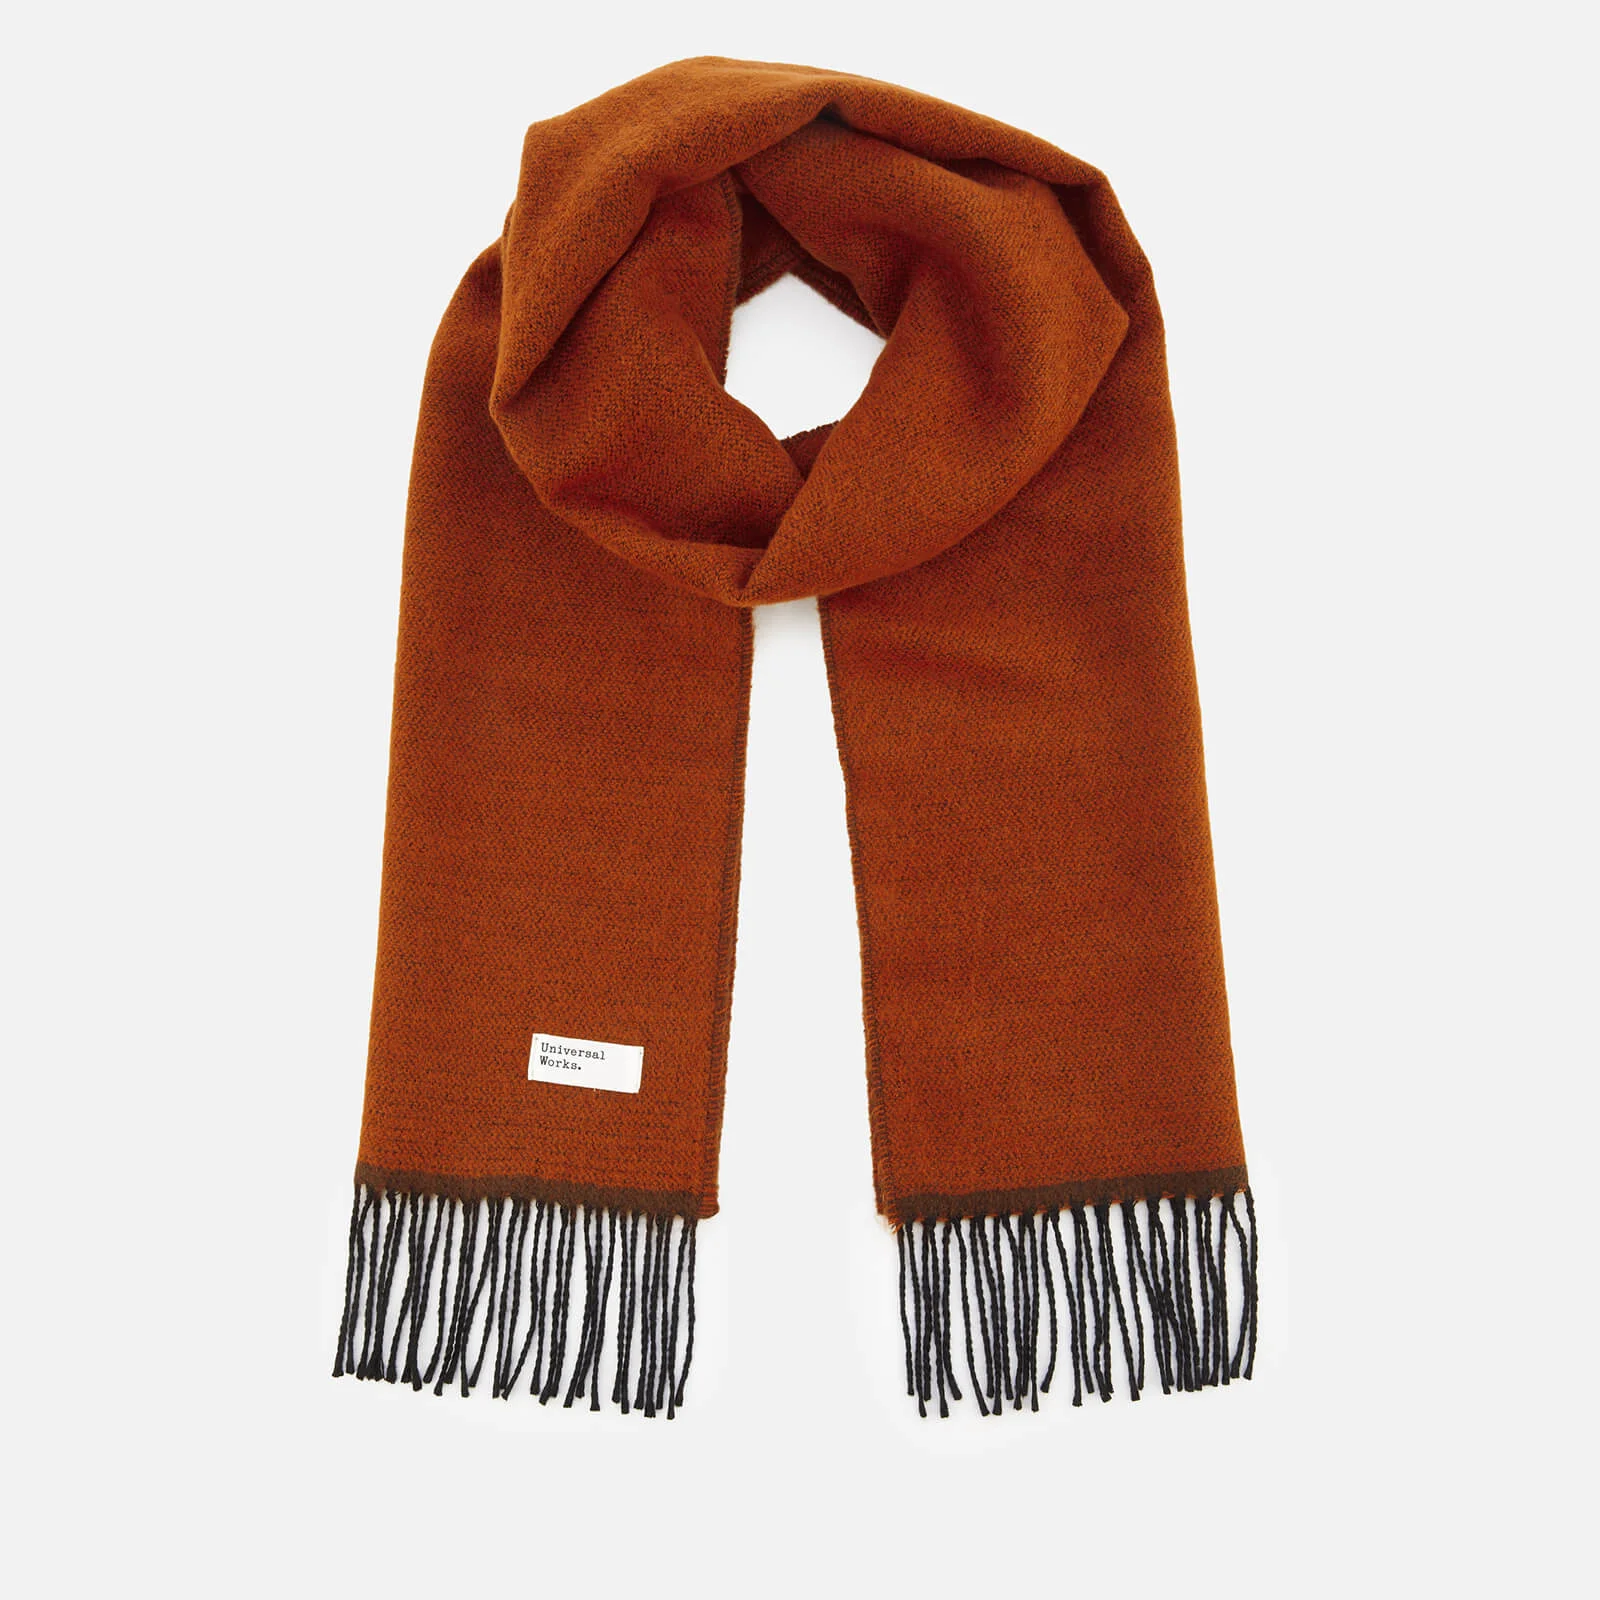 Universal Works Men's Double Sided Scarf - Orange/Brown Image 1